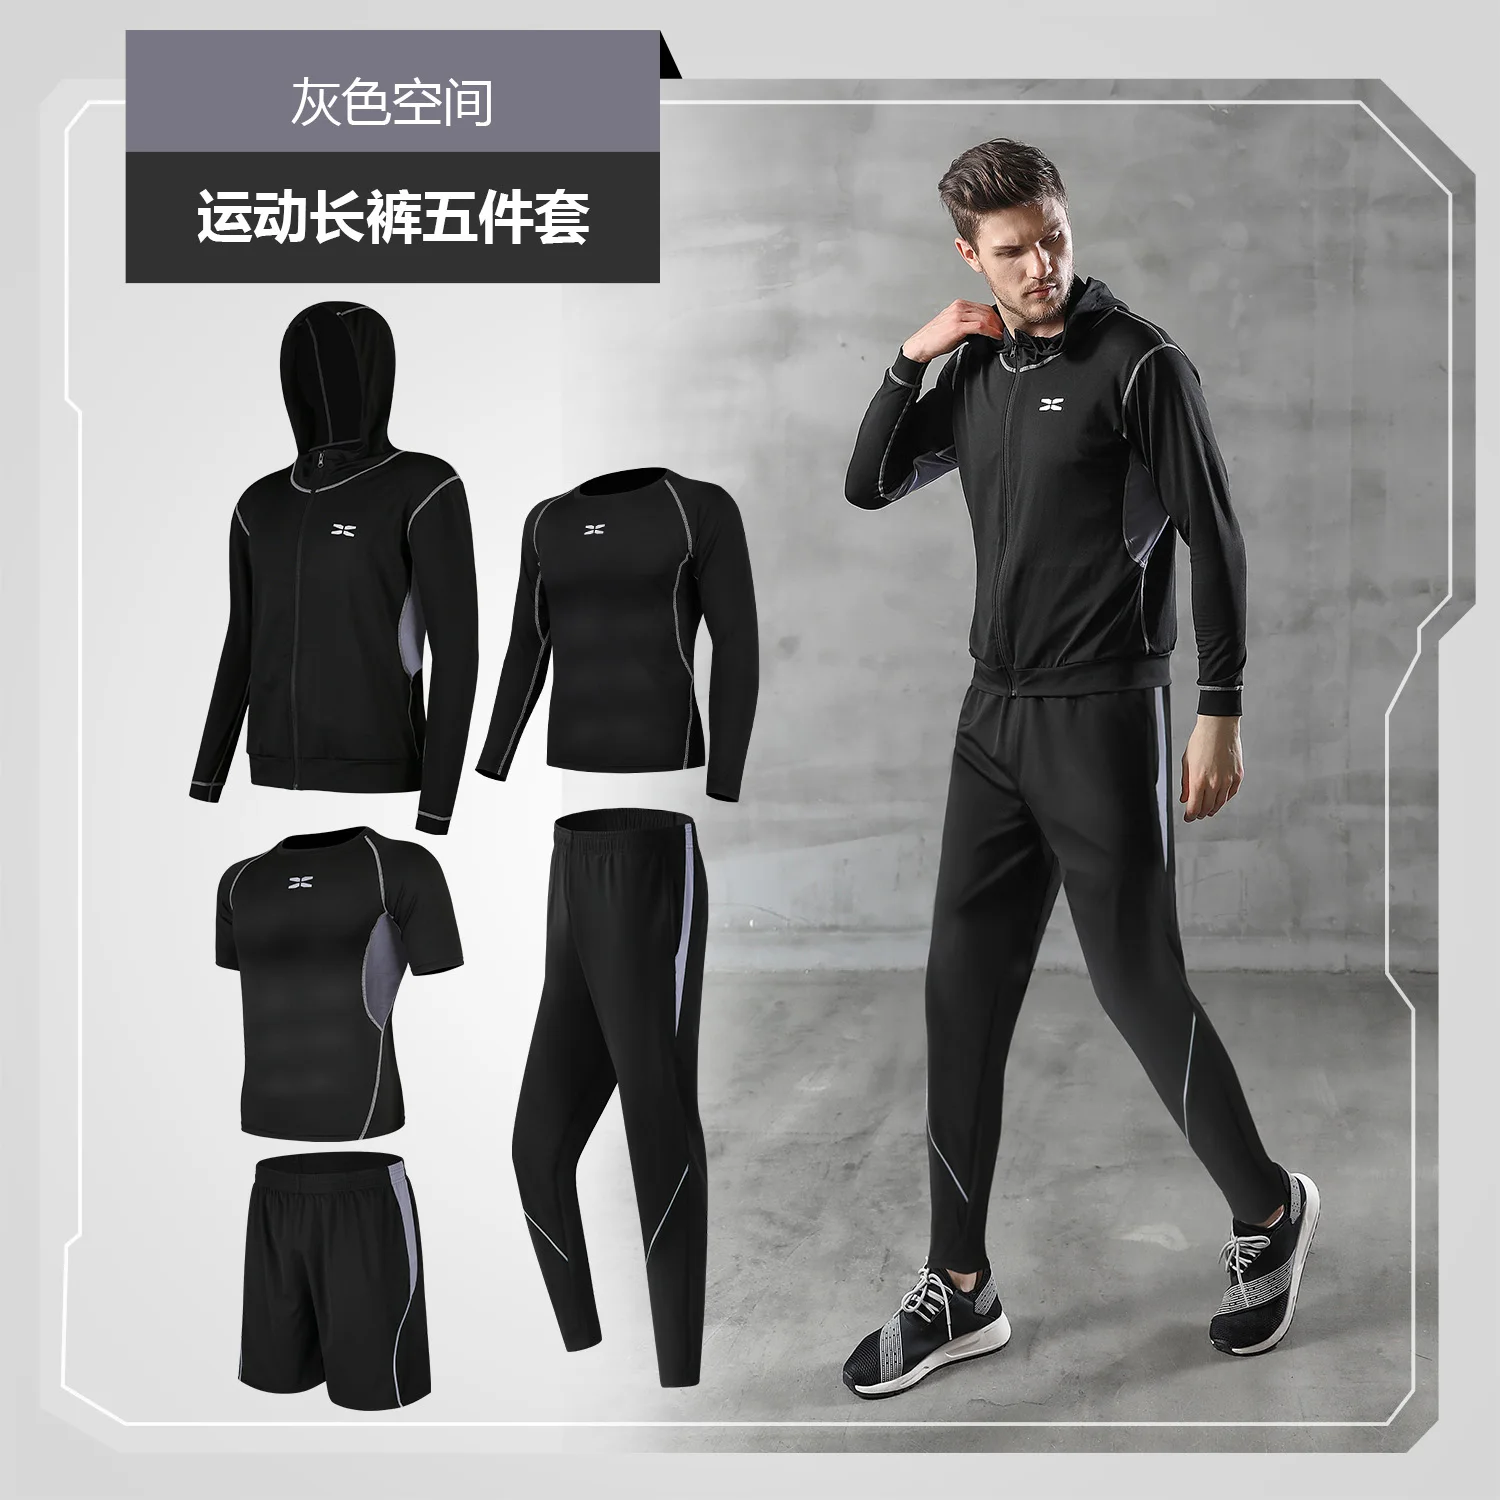 Worth While 5 Pcs/Set Men's Tracksuit Compression Sports Wear for Men Gym  Fitness Exercise Workout Tights Running Jogging Suits - AliExpress